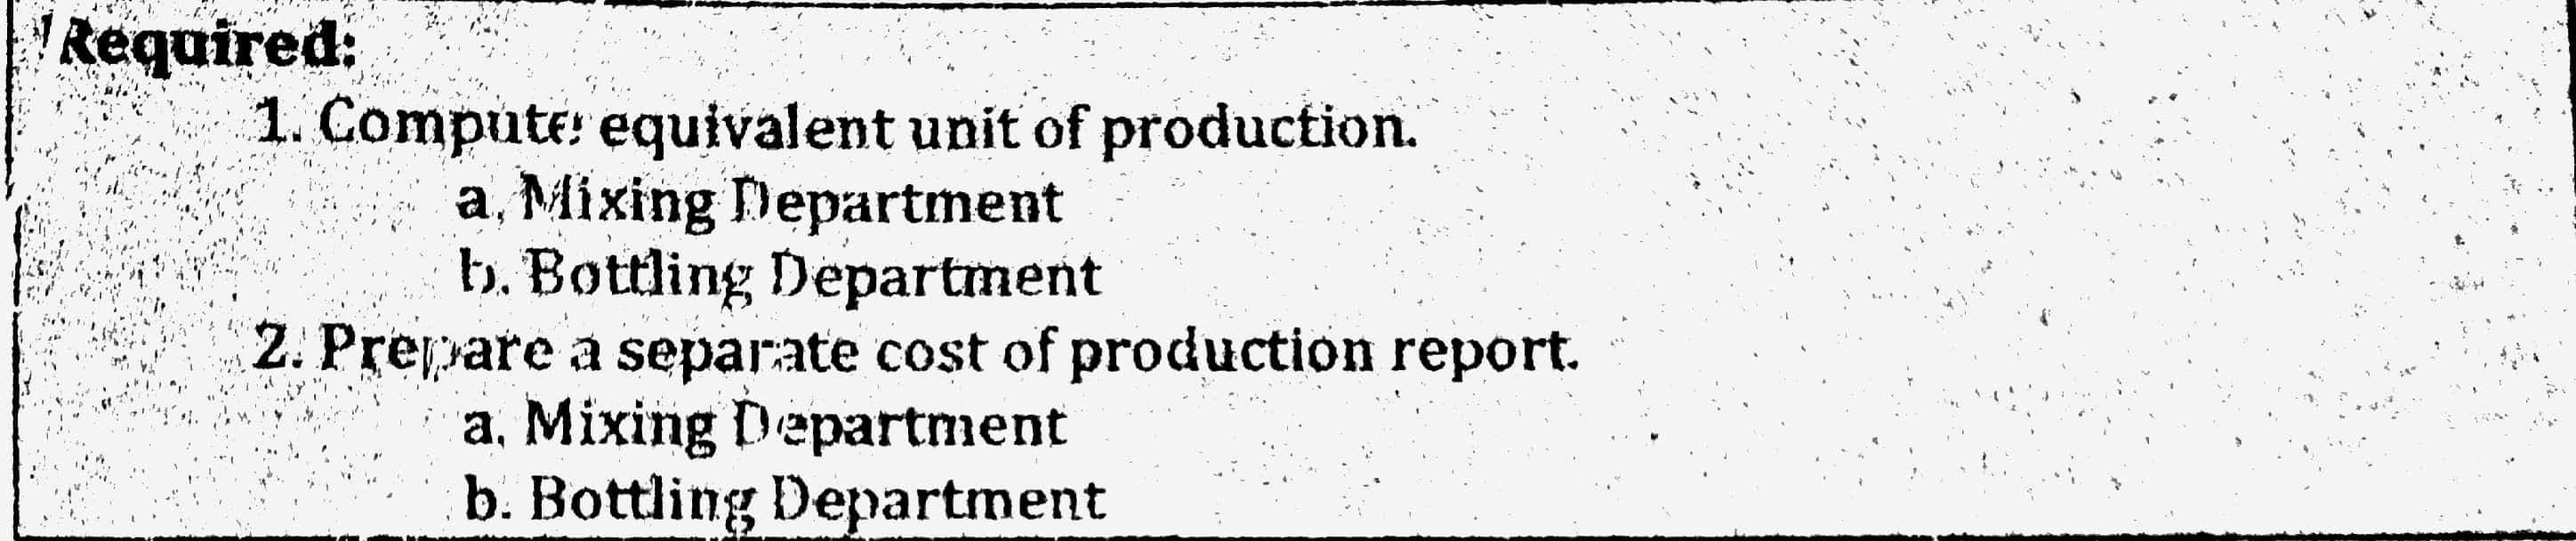 Required:
1. Compute: equivalent unit of production.
a, Mixing Department
b. Bottling Department
2. Prepare a separate cost of production report.
a, Mixing Department
b. Bottling Department
